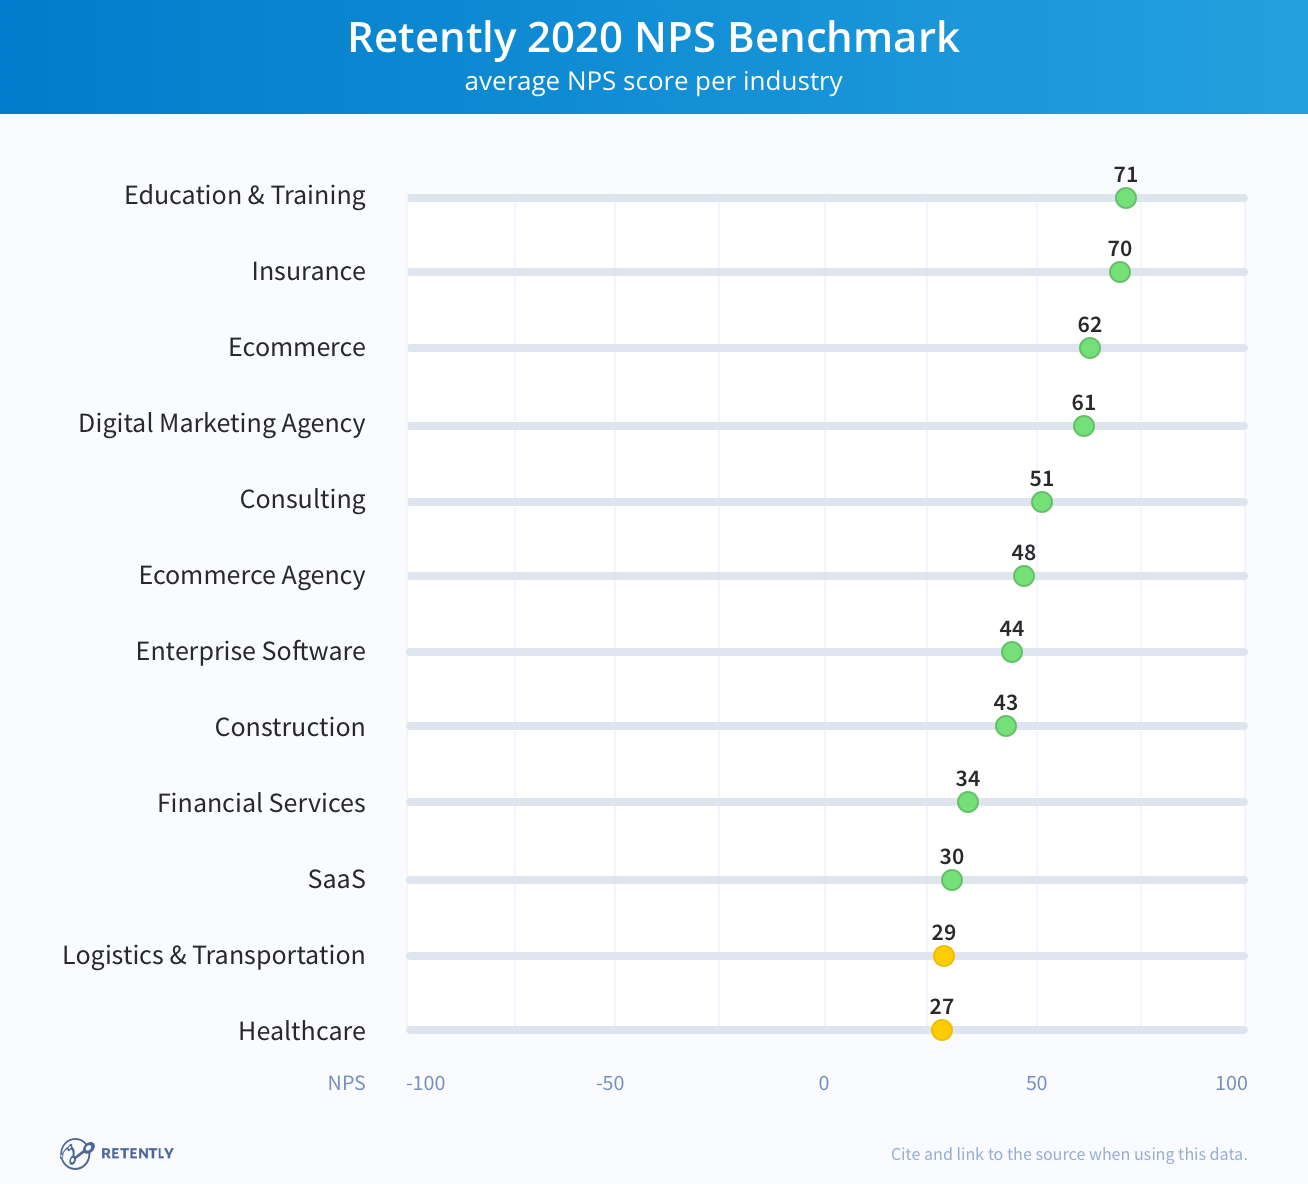 A graph titled “Retently 2020 NPS Benchmark, showing NPS scores by industry. Top of scale, “Education & Training” rated at +71. Next down, “Insurance” rated at +70. Next, “Ecommerce” rated at +62. “Digital Marketing Agency” rated at +61. “Consulting” rated at +51. “Ecommerce Agency” rated at +48. “Enterprise Software” rated at +44. “Construction” rated at +43. “Financial Services rated at +34. 'SaaS” rated at +30. “Logistical & Transportation” rated at +29 and finally “Healthcare” rated at +27.